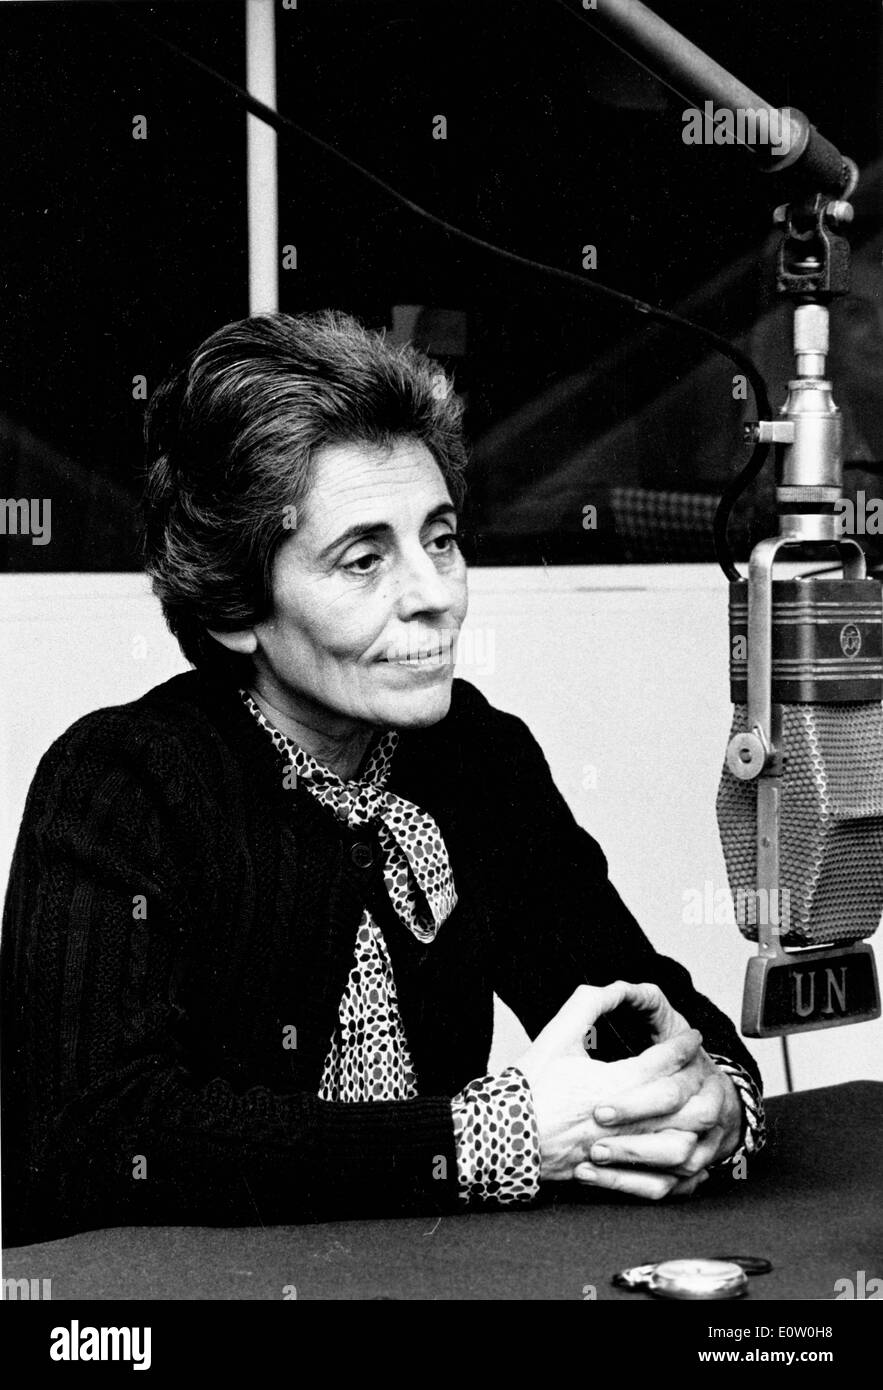 Francoise Giroud French Minister for Women's Affairs   March 6, 1975, New York, New York, USA: FRANCOISE GIROUD, French Minister for Women's Affairs, being interviewed on UN Radio.  Giroud was a the United Nations Headquarters for meetings of the Consultative Committee for the World Conference of International  Women's Year on 6th March 1975. Stock Photo